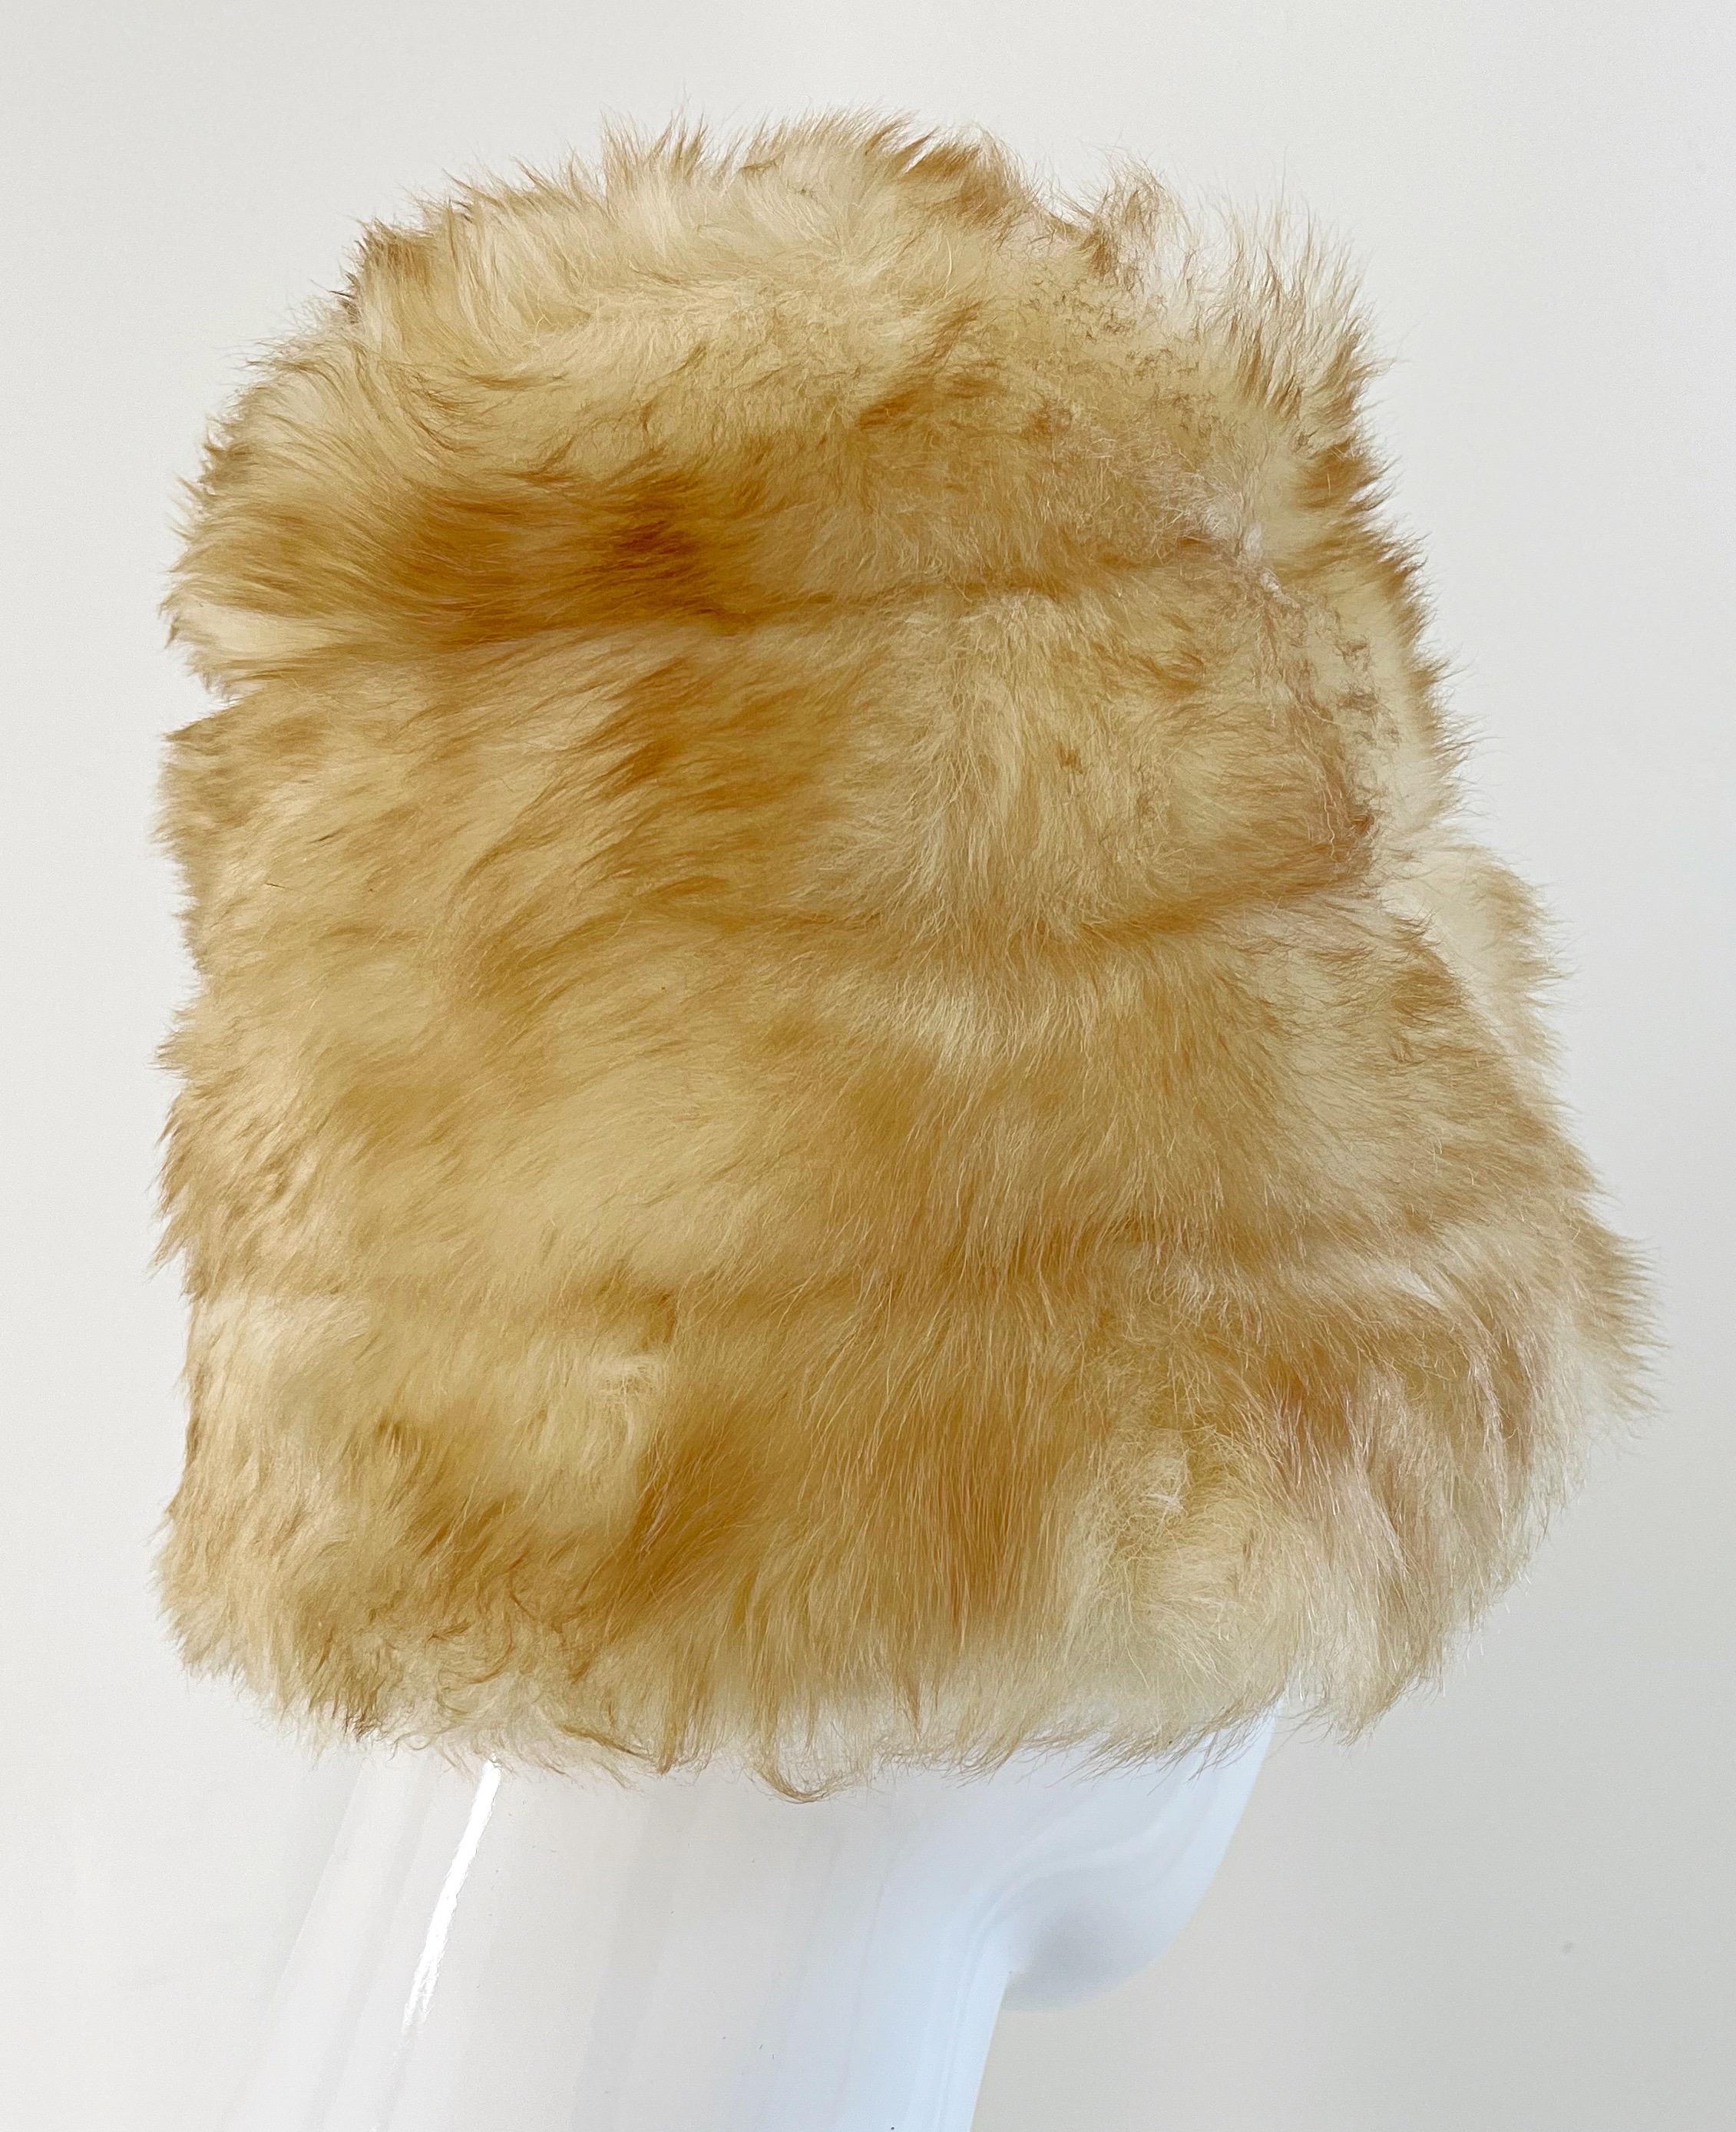 Yves Saint Laurent Fall 1976 Russian Collection Shearling Honey Tan Fur Hat 70s 5